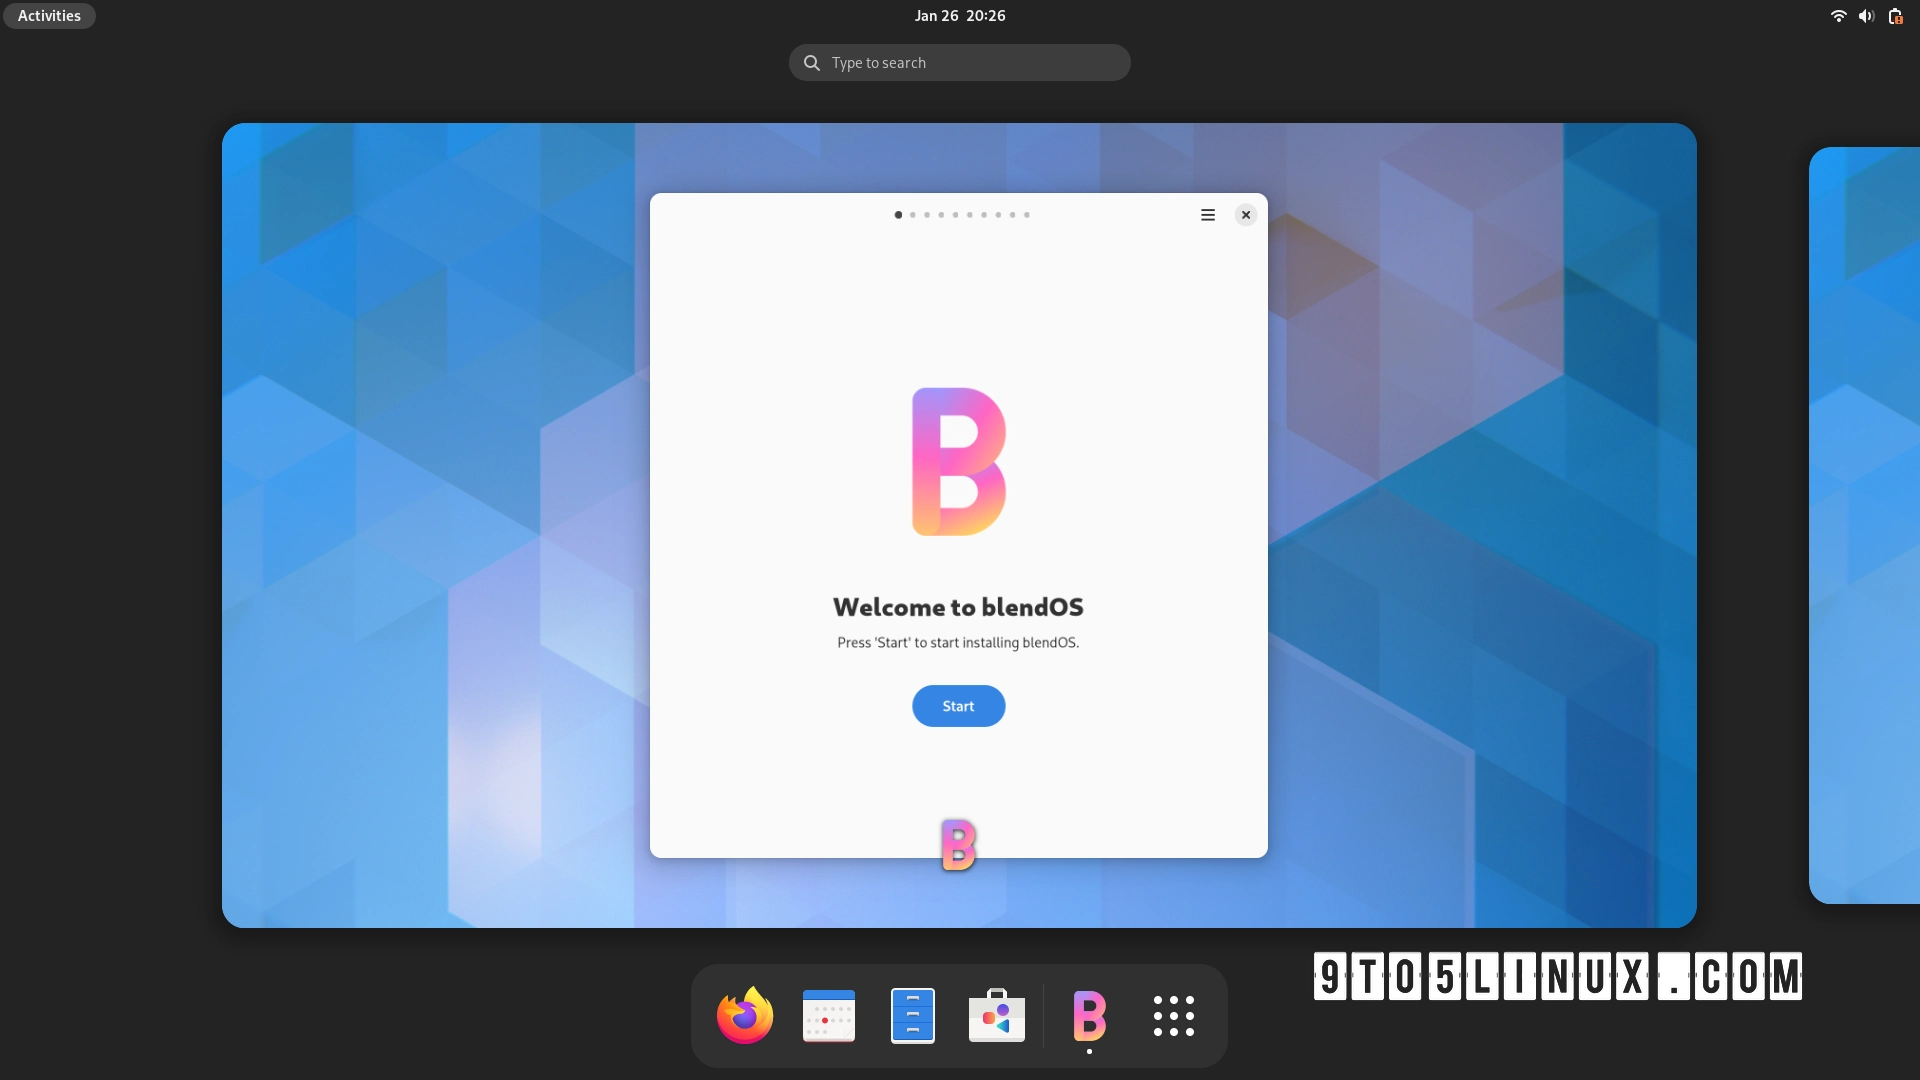 First Look at blendOS: A Blend of Arch Linux, Fedora Linux, and Ubuntu